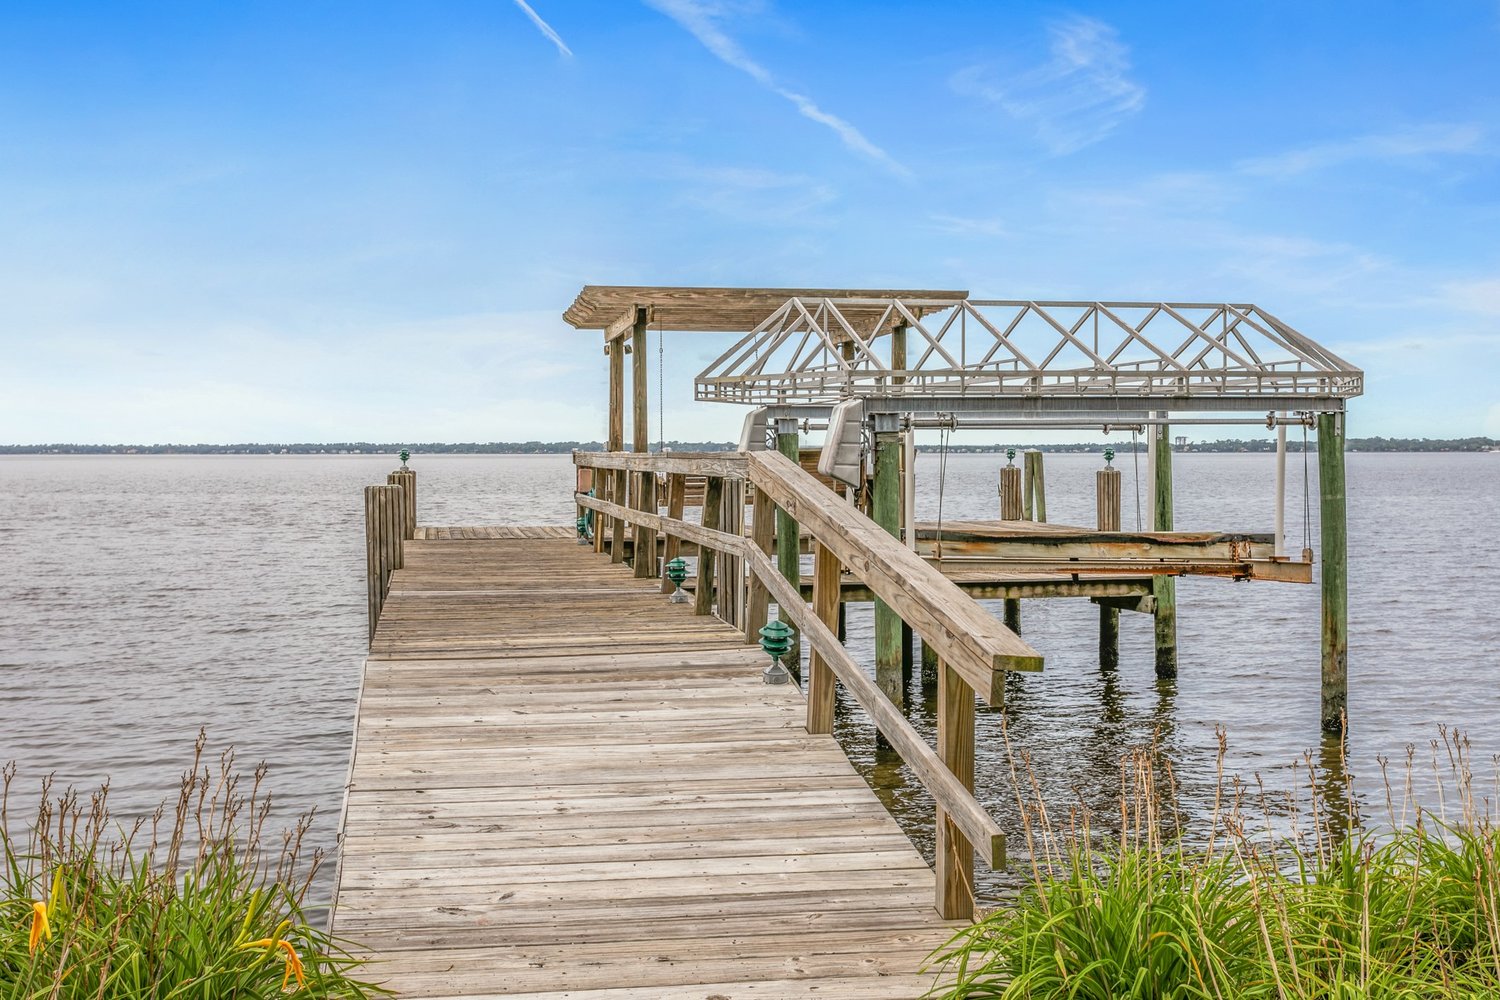 The dock on the St. Johns River is directly behind the house.